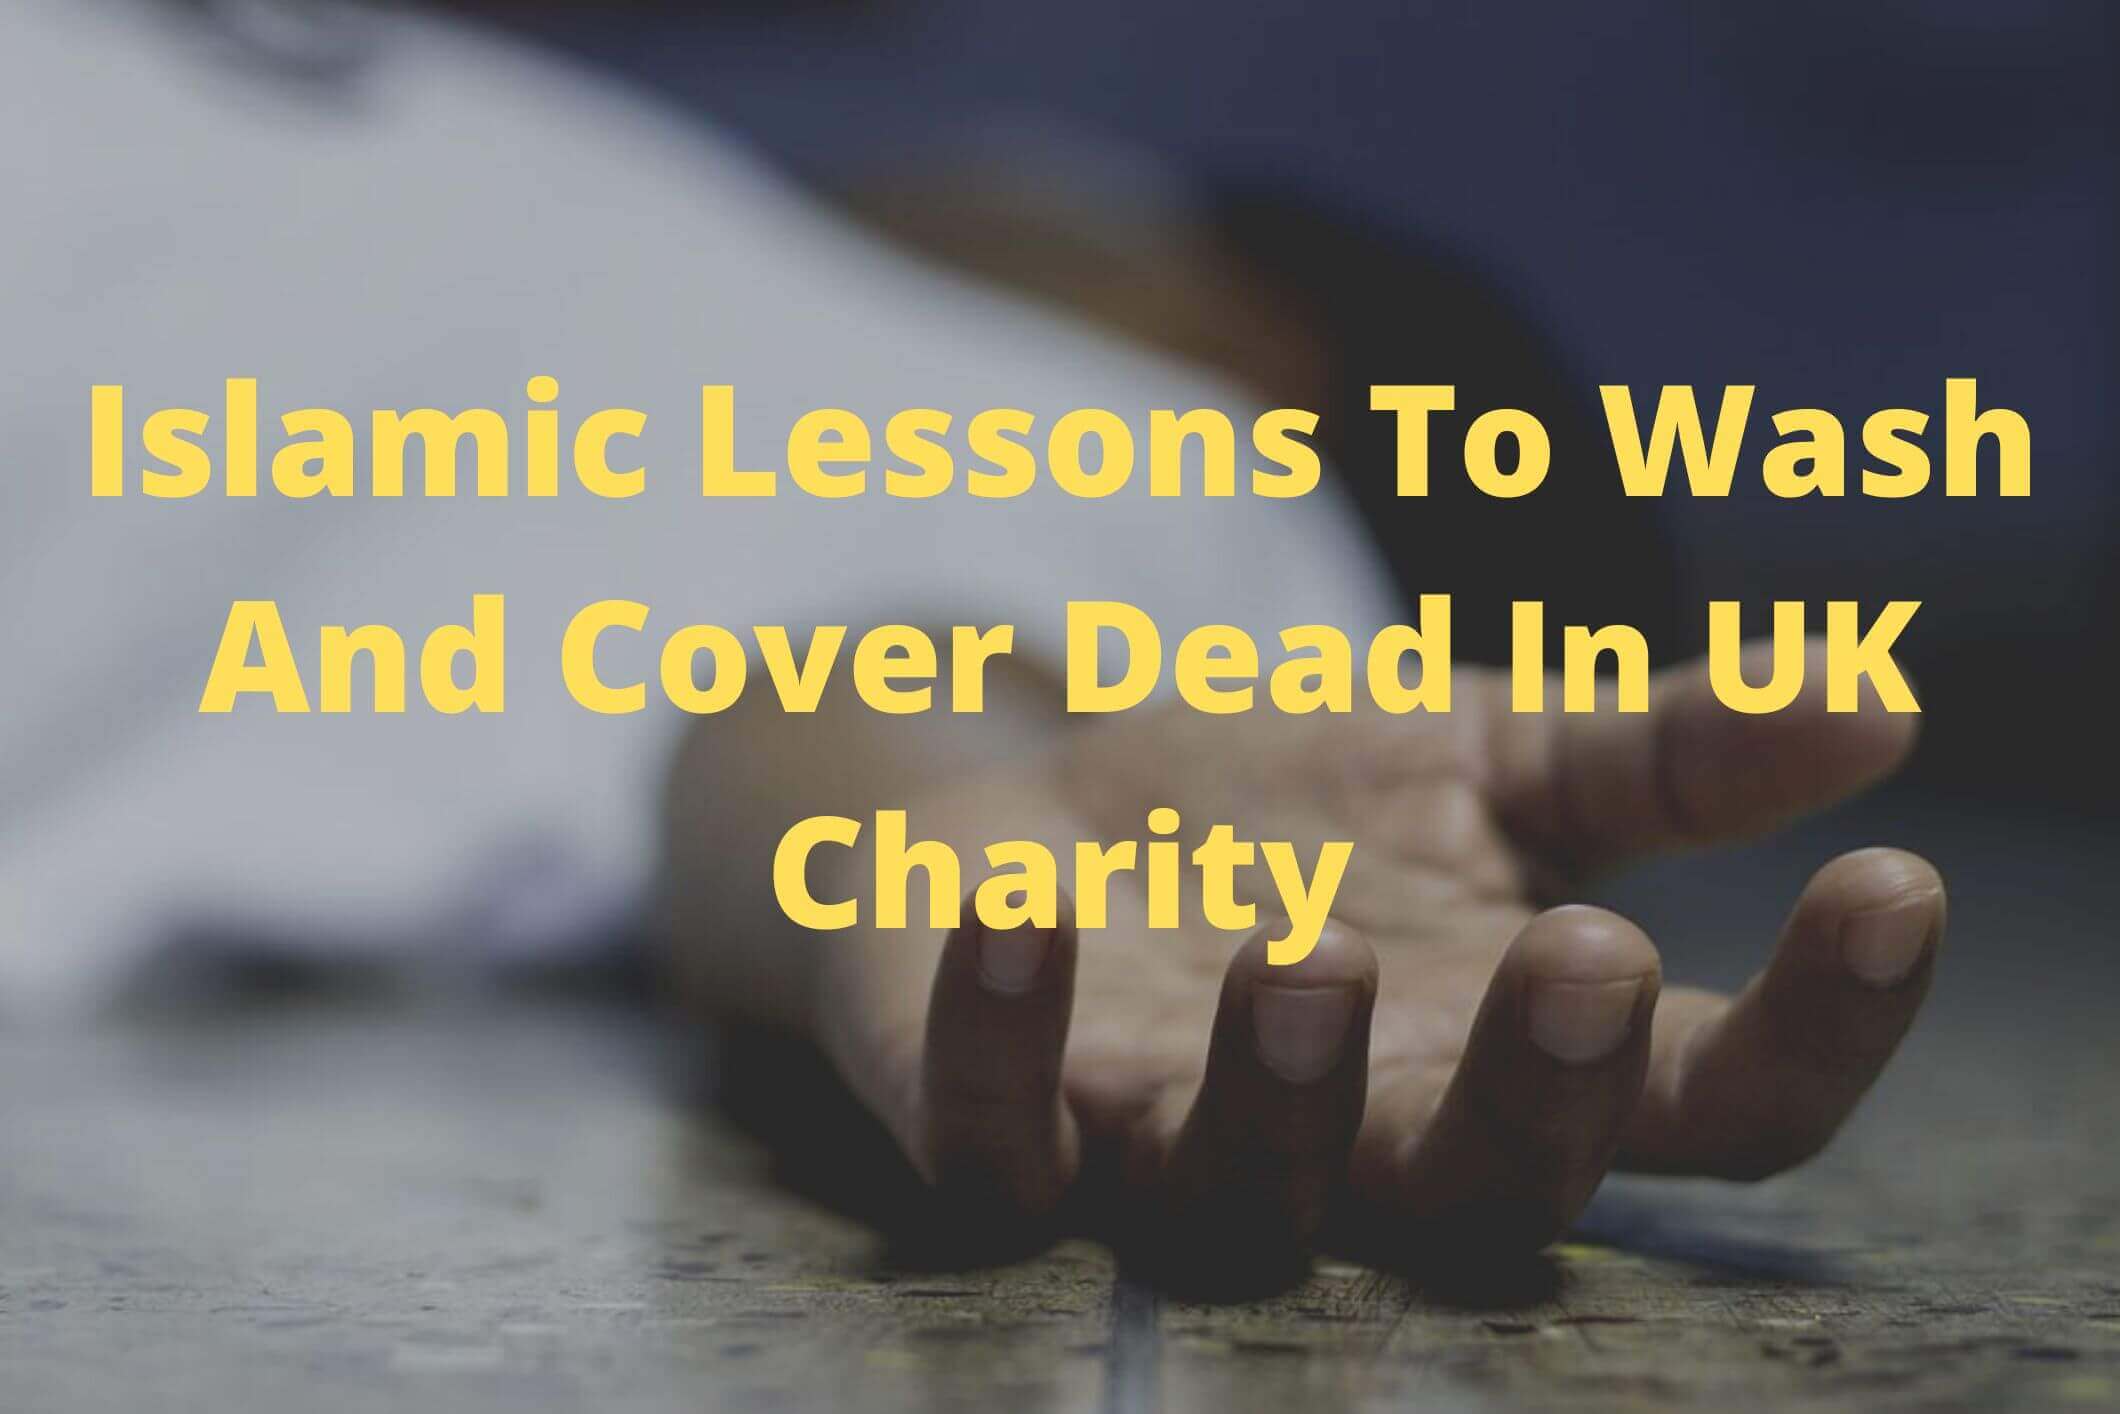 Islamic Lessons To Wash And Cover Dead In UK Charity